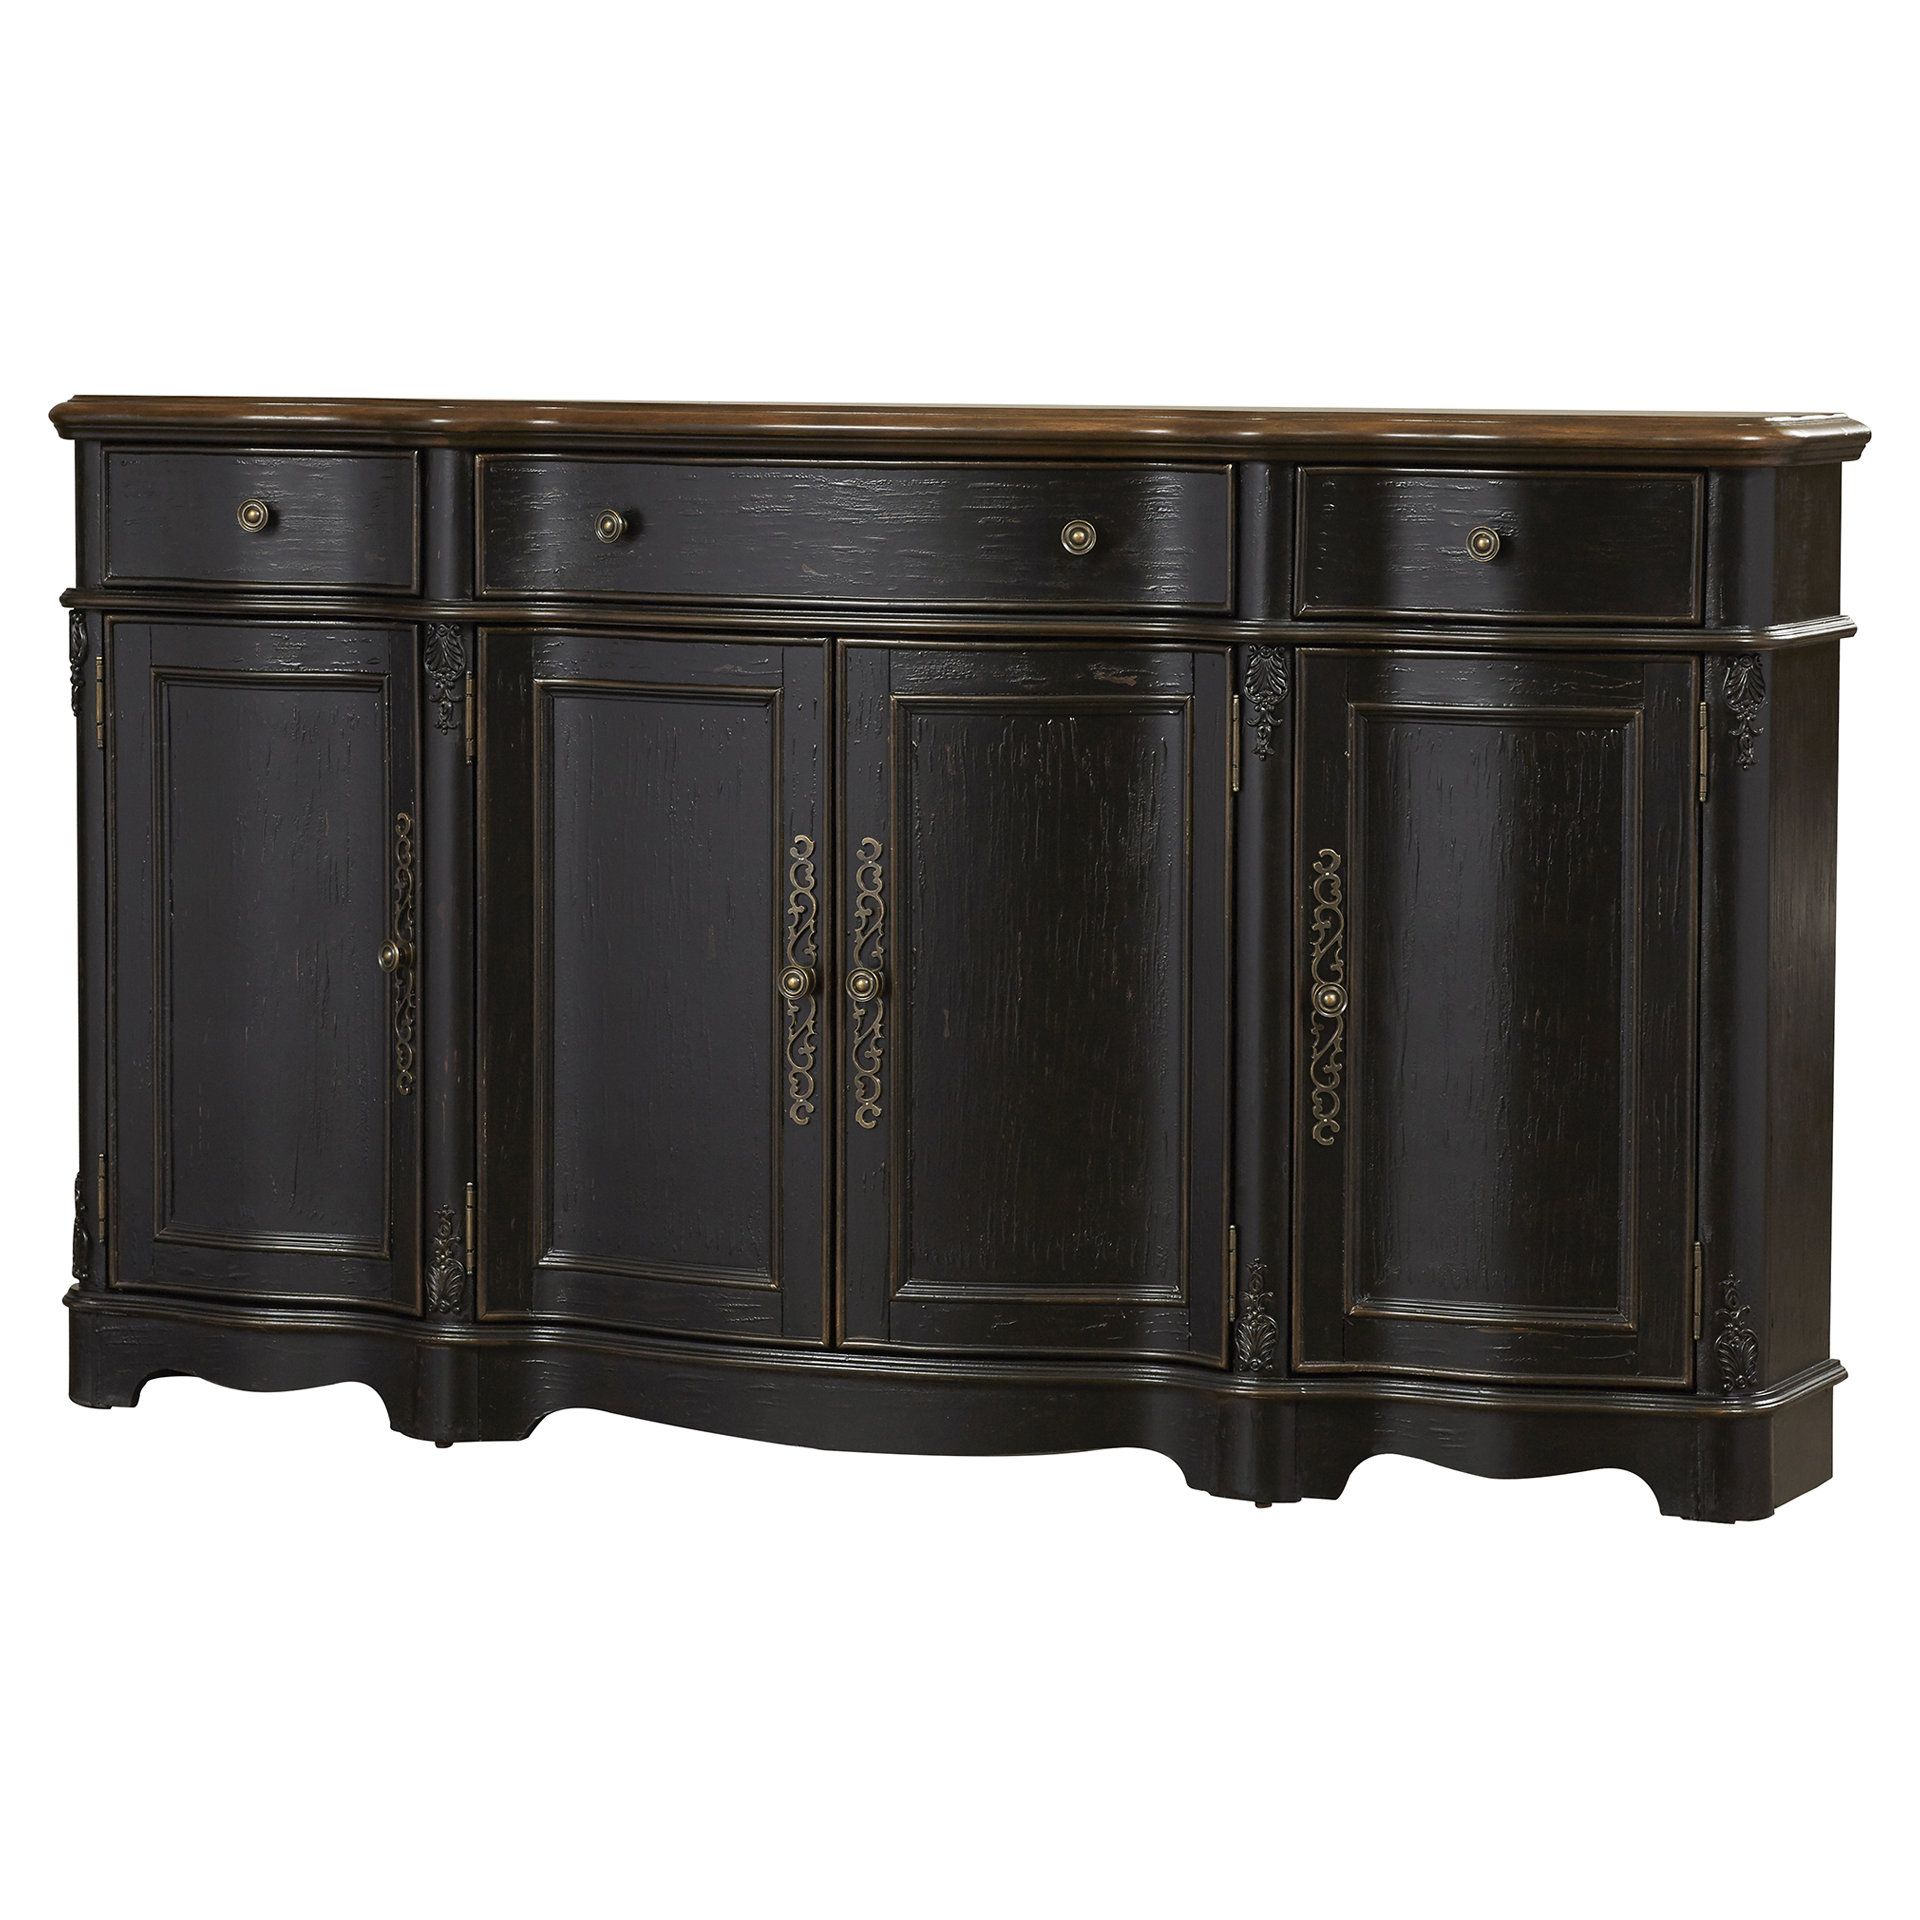 Hewlett Sideboard In Recent Ilyan Traditional Wood Sideboards (View 12 of 20)